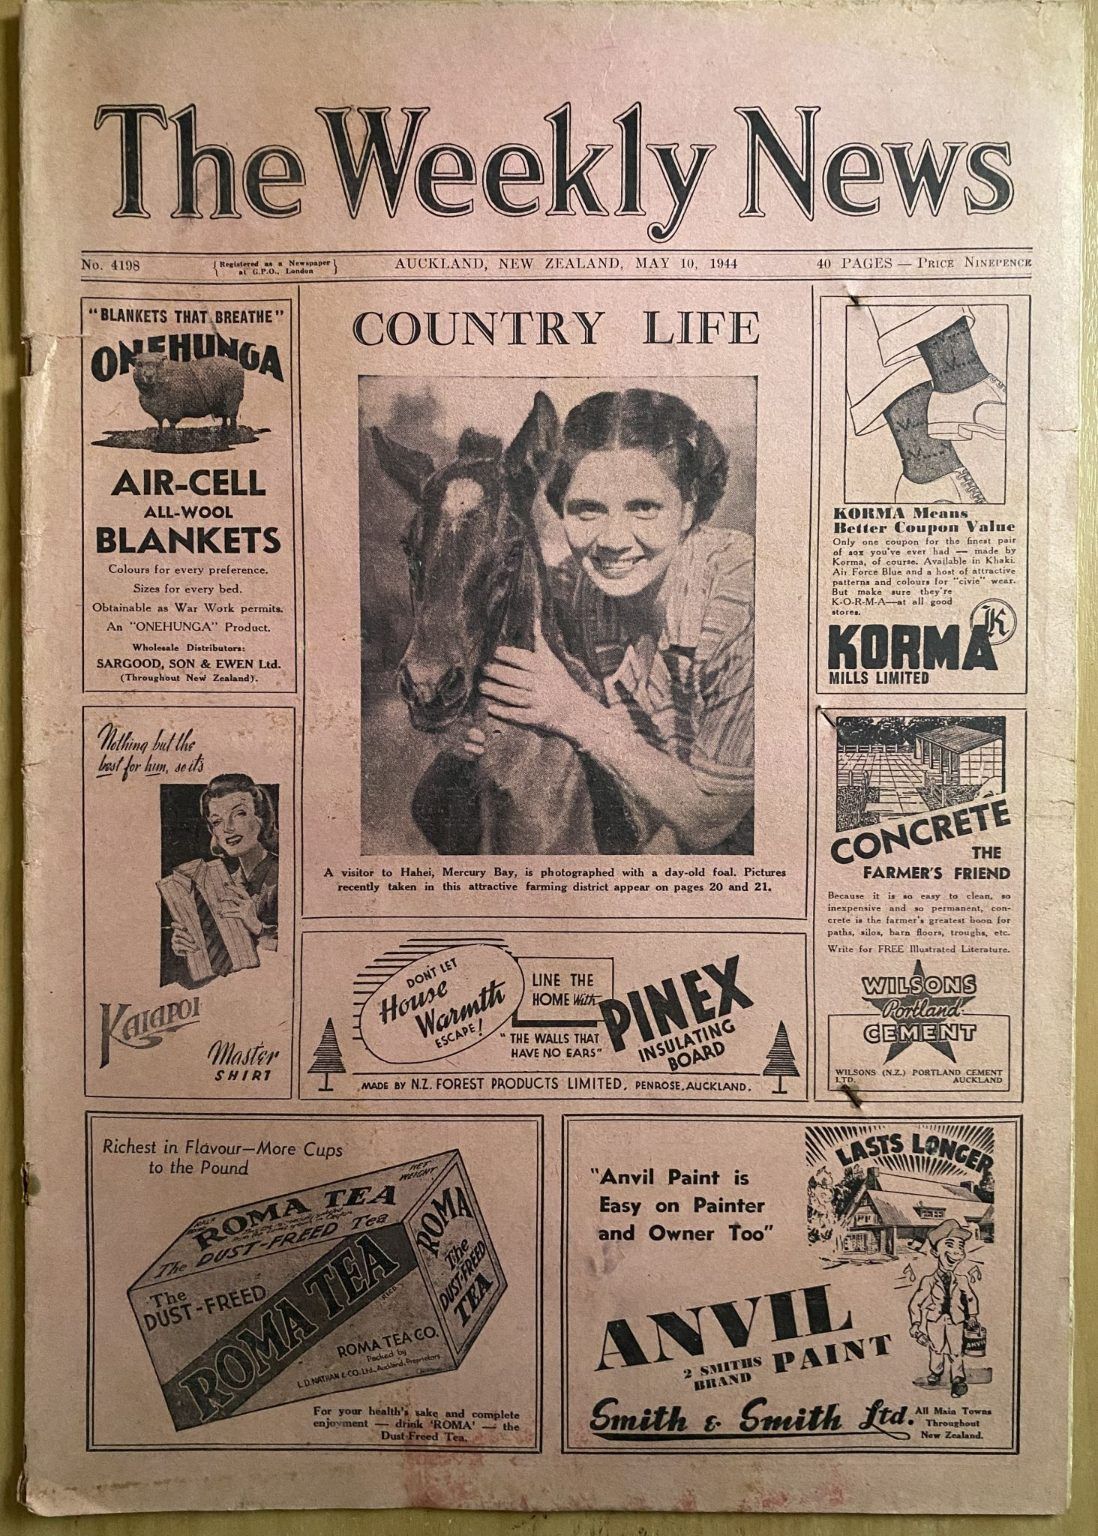 OLD NEWSPAPER: The Weekly News - No. 4198, 10 May 1944